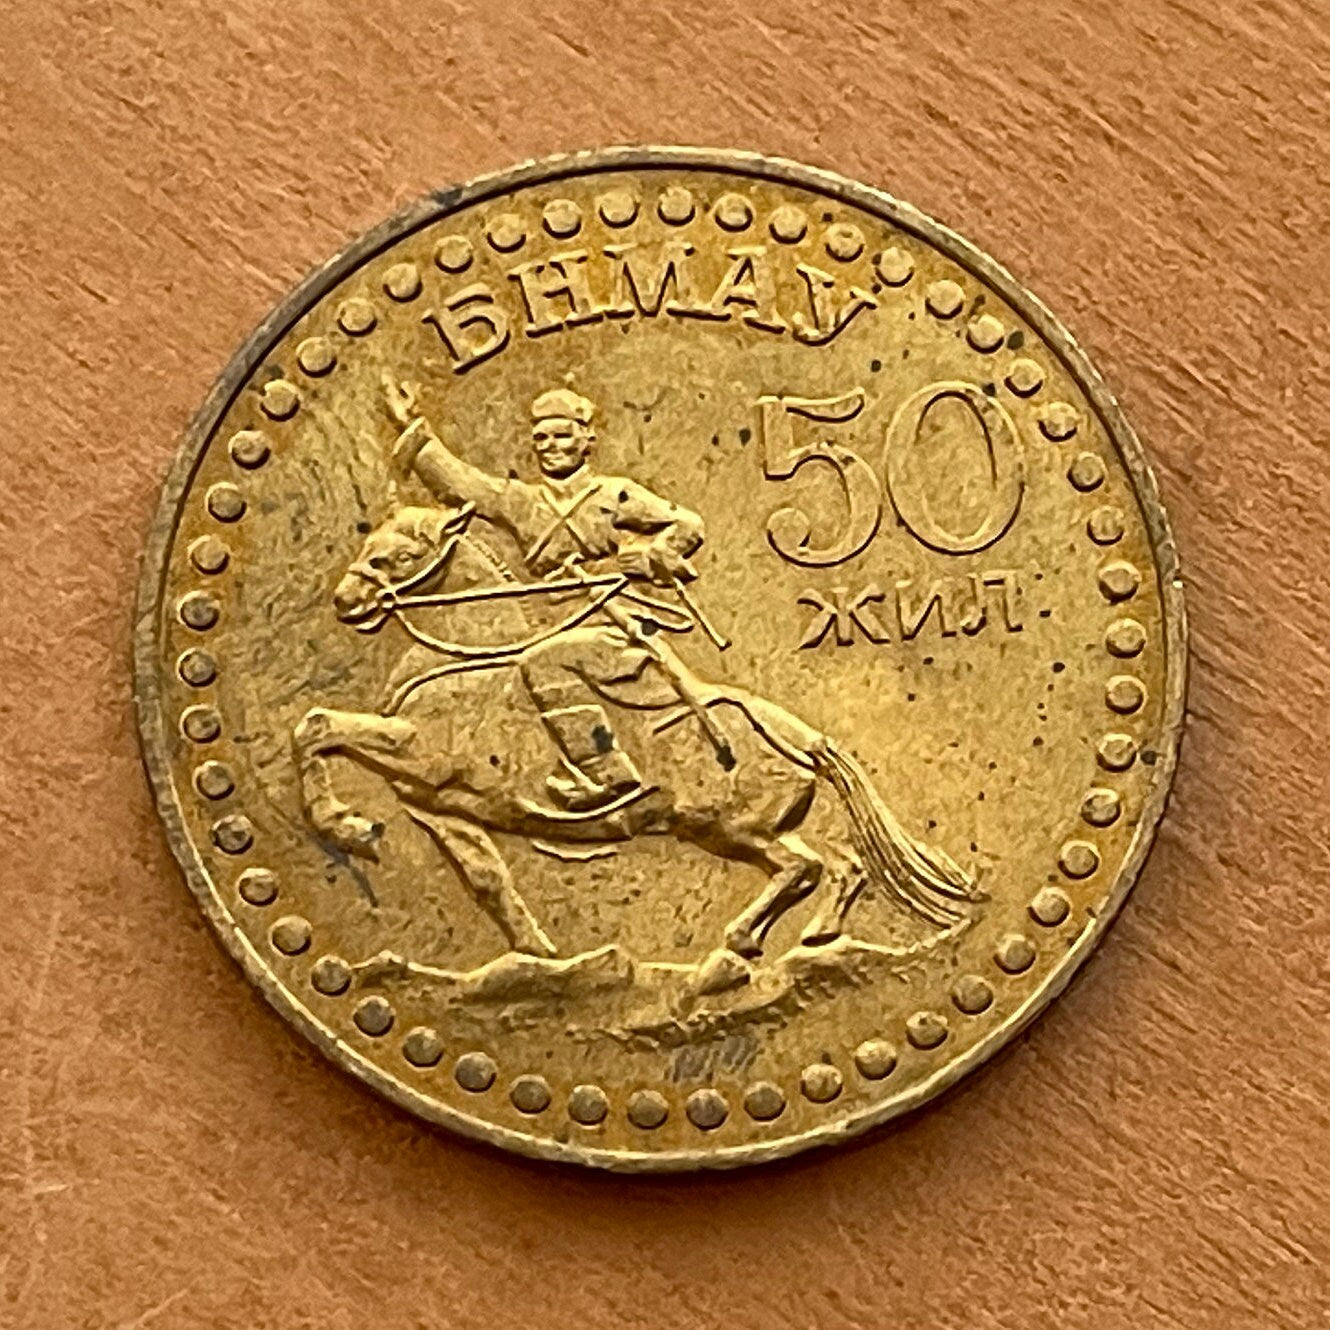 Revolutionary Damdin Sükhbaatar on Horse 1 Tögrög Mongolia Authentic Coin Money for Jewelry (Father of the Revolution) 50 Anniversary (1971)